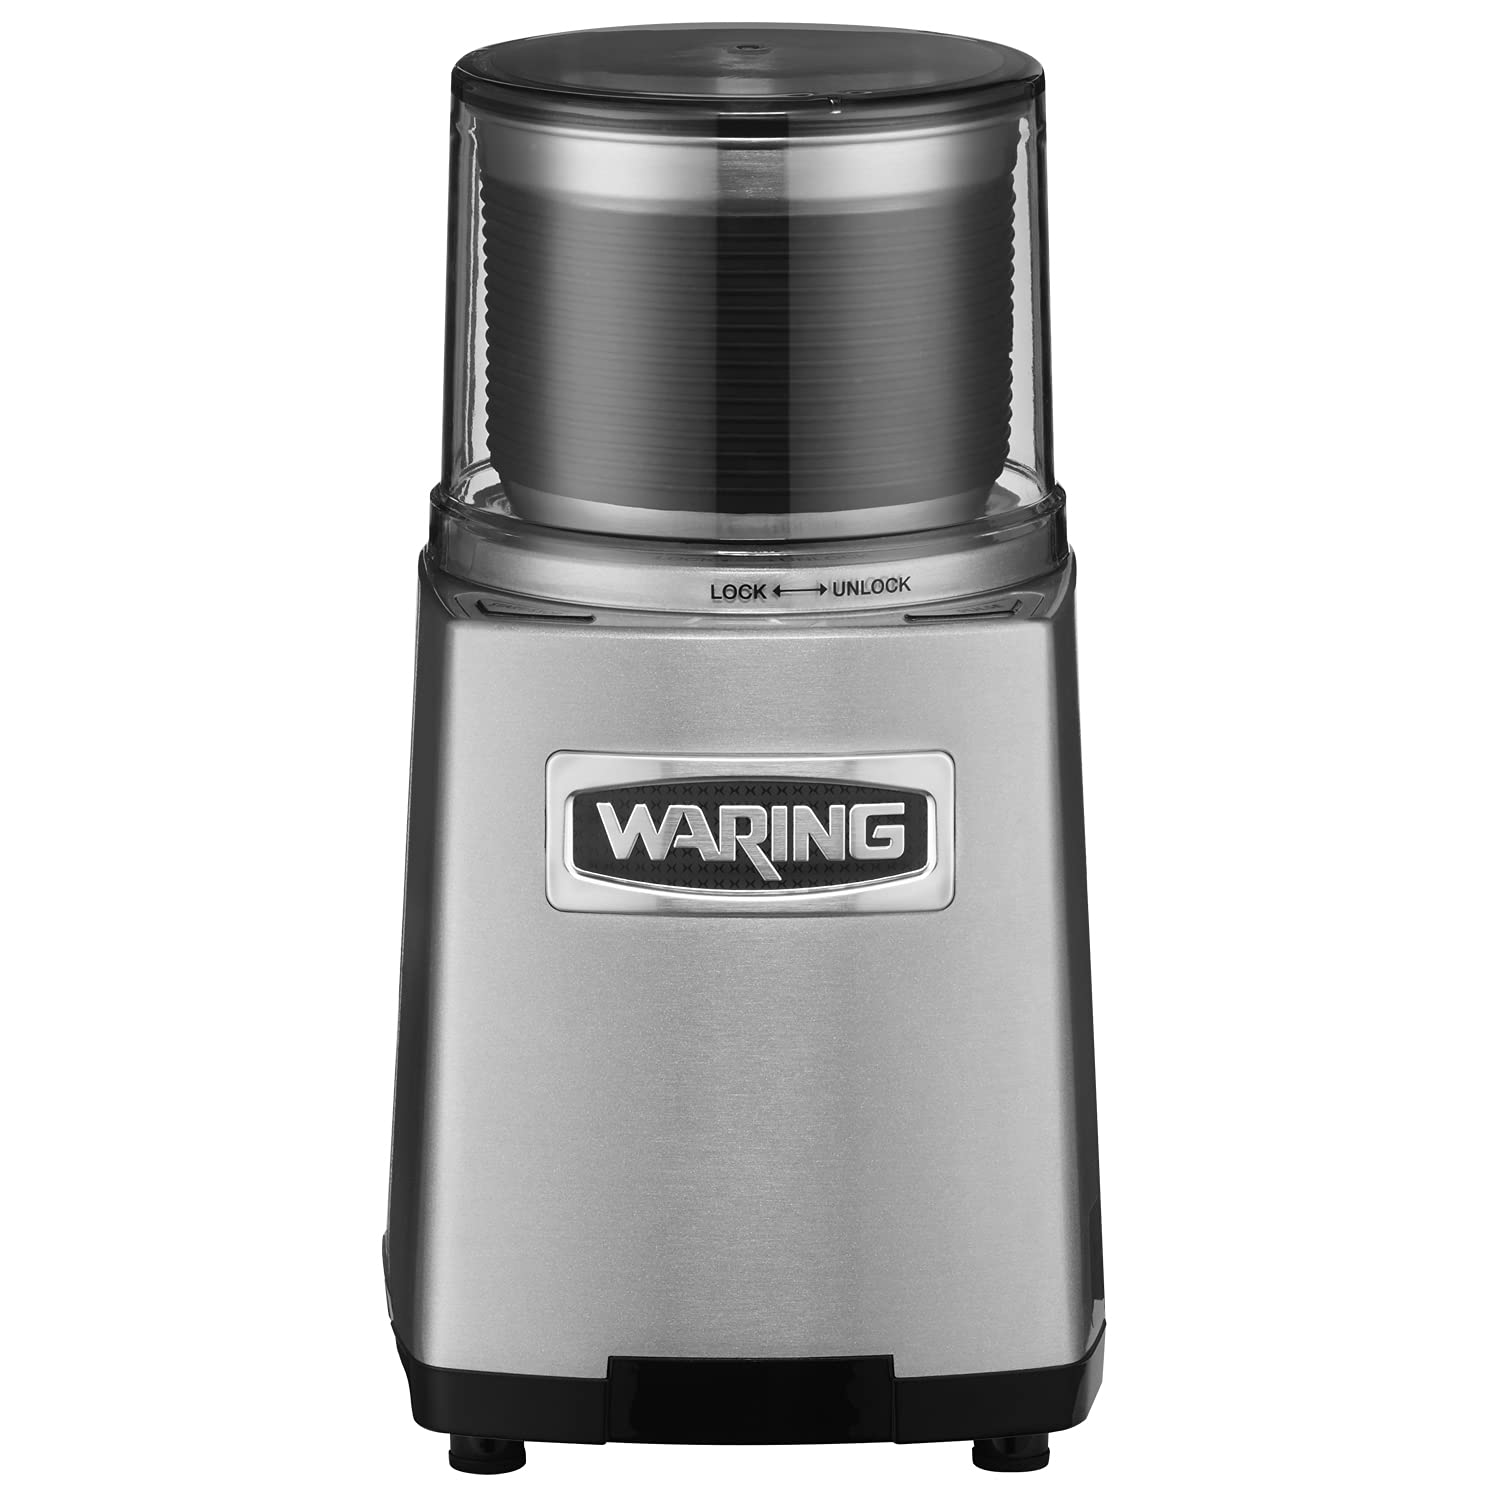 Waring Commercial WSG60 3 Cup Spice Grinder, 1 HP Motor, 20,000 RPM's, Pulse Actuation, Includes 2 stainless steel grinding-bowls-120V, 175W, 5...